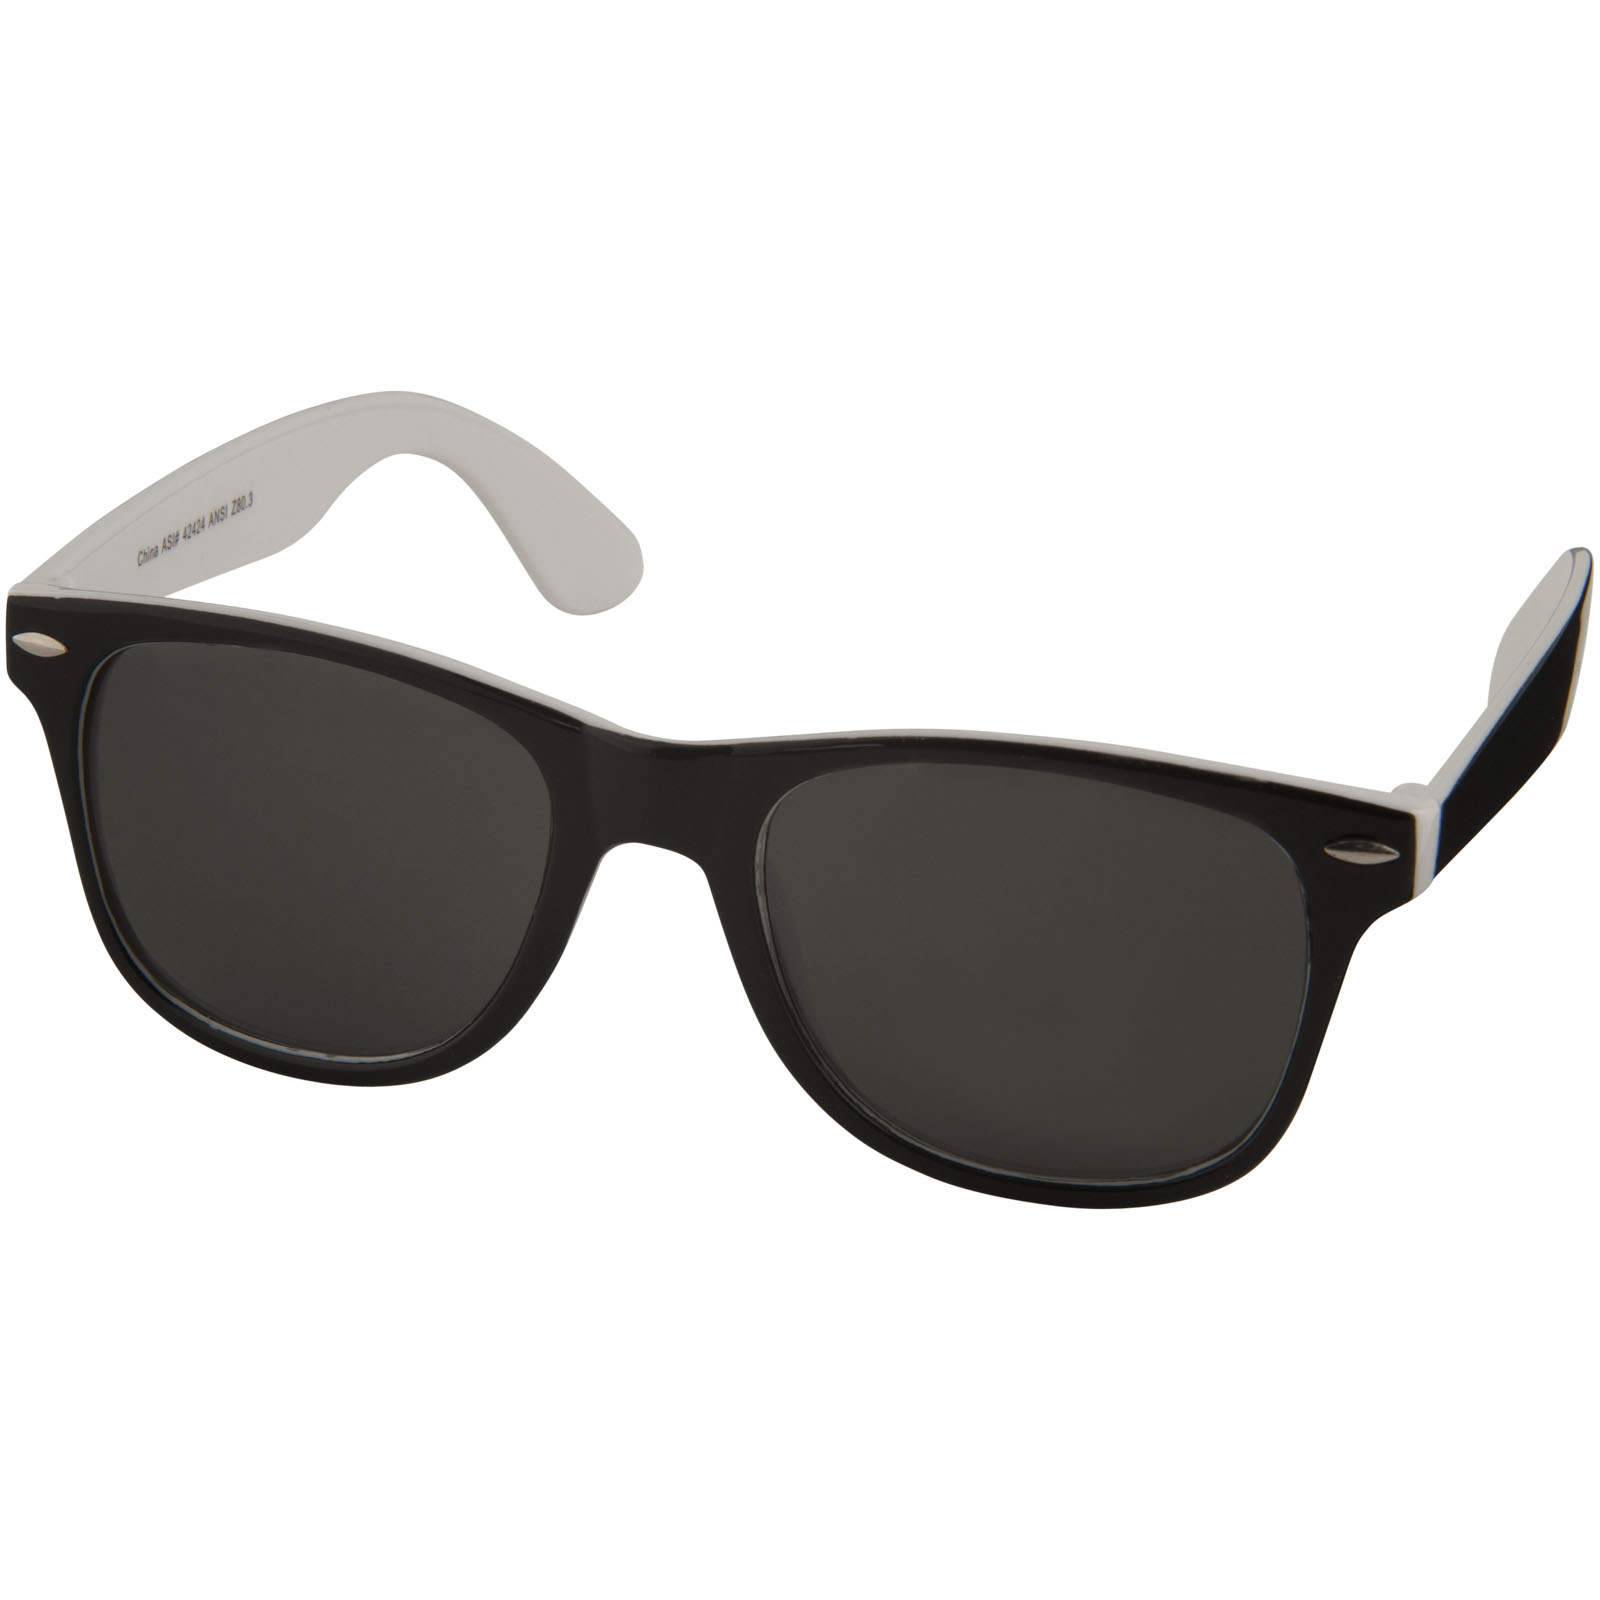 Sports & Leisure - Sun Ray sunglasses with two coloured tones